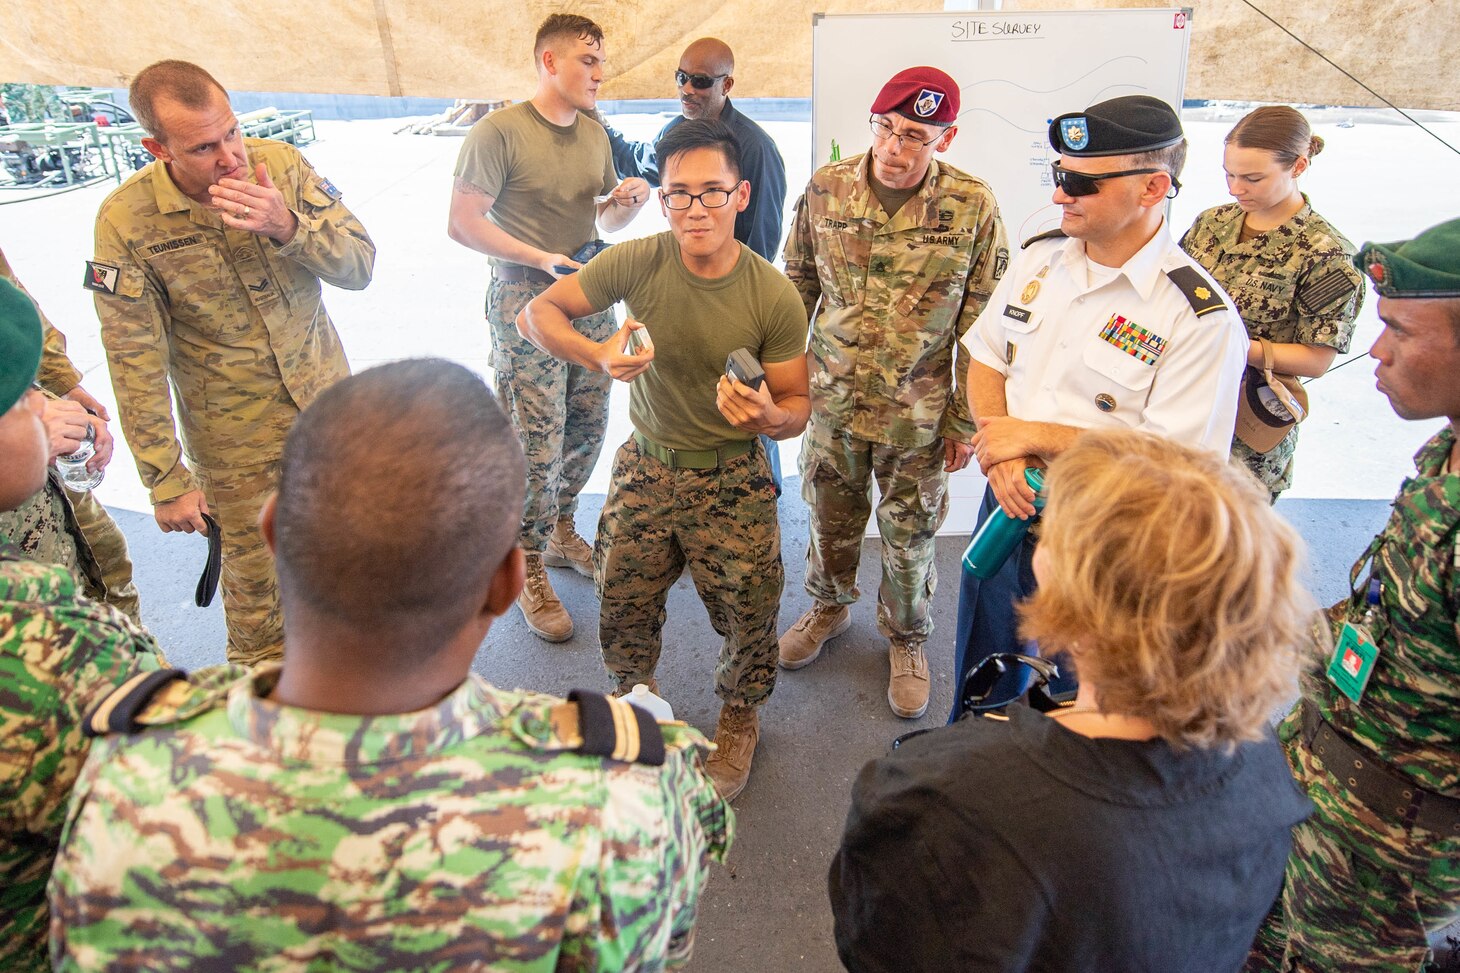 DILI, Timor-Leste (April 23, 2019) – U.S. Marine Corps L.Cpl. Thien Nguyen explains the process of examining chlorine levels in water sources to Kathleen Fitzpatrick, U.S. ambassador to Timor-Leste, and Timor-Leste Defense Force members during a subject matter expert exchange as part of Pacific Partnership 2019. Pacific Partnership, now in its 14th iteration, is the largest annual multinational humanitarian assistance and disaster relief preparedness mission conducted in the Indo-Pacific. Each year the mission team works collectively with host and partner nations to enhance regional interoperability and disaster response capabilities, increase security and stability in the region, and foster new and enduring friendships in the Indo-Pacific.